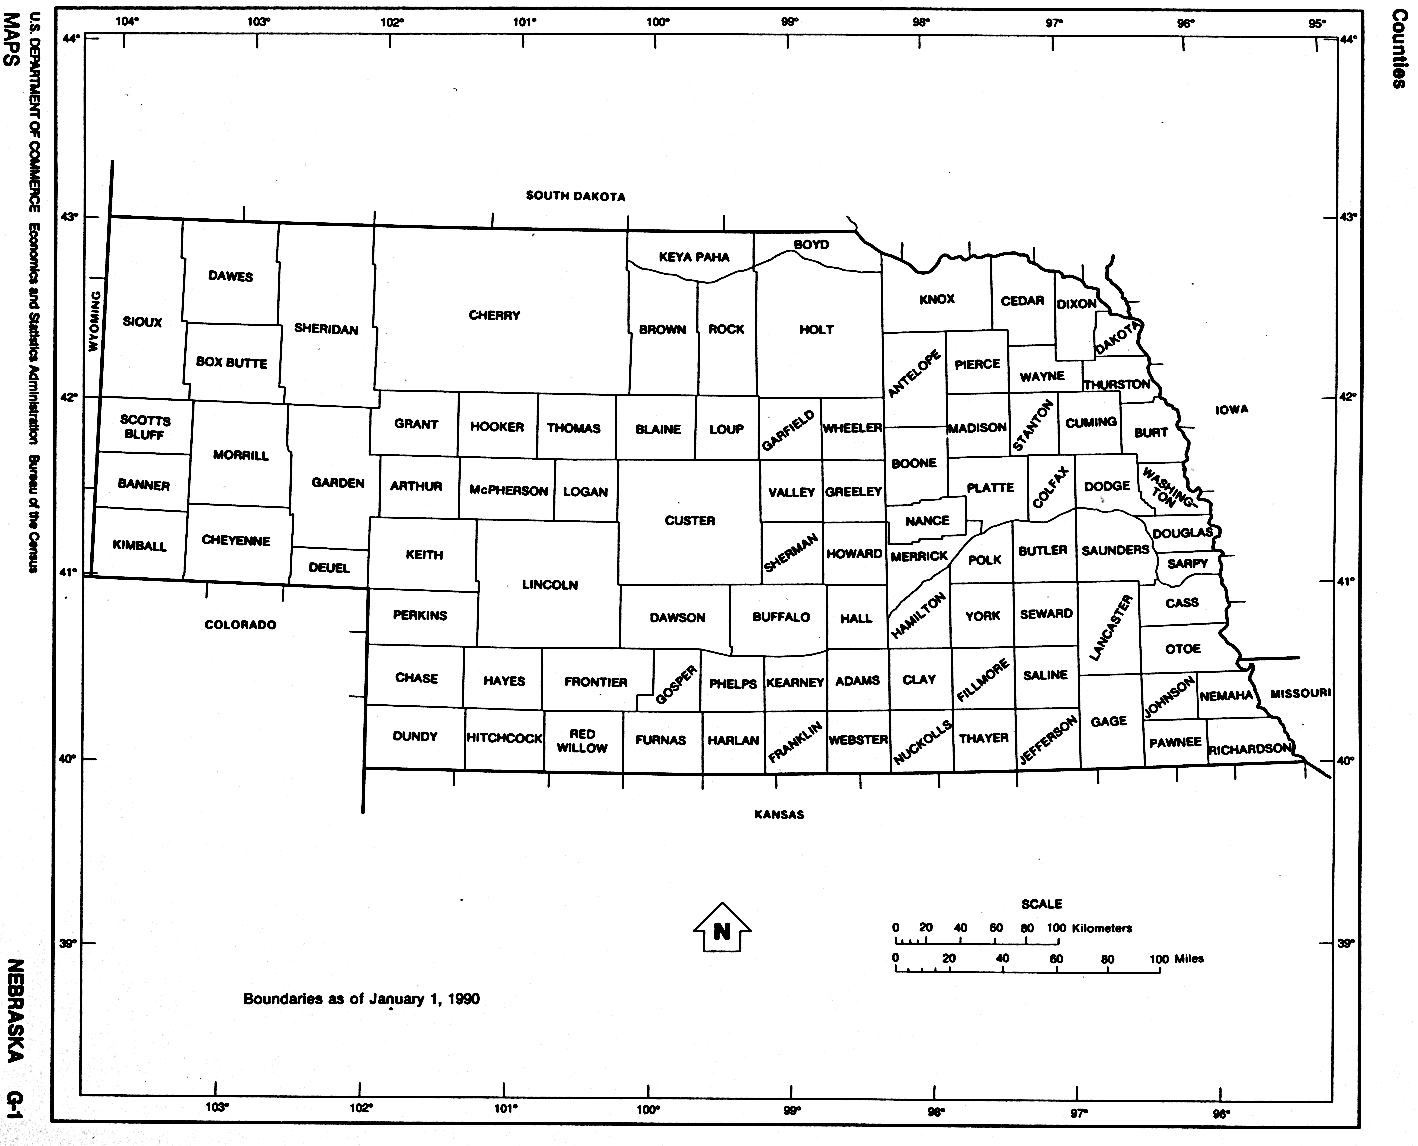 Nebraska Counties map with outline and location of each county in NE